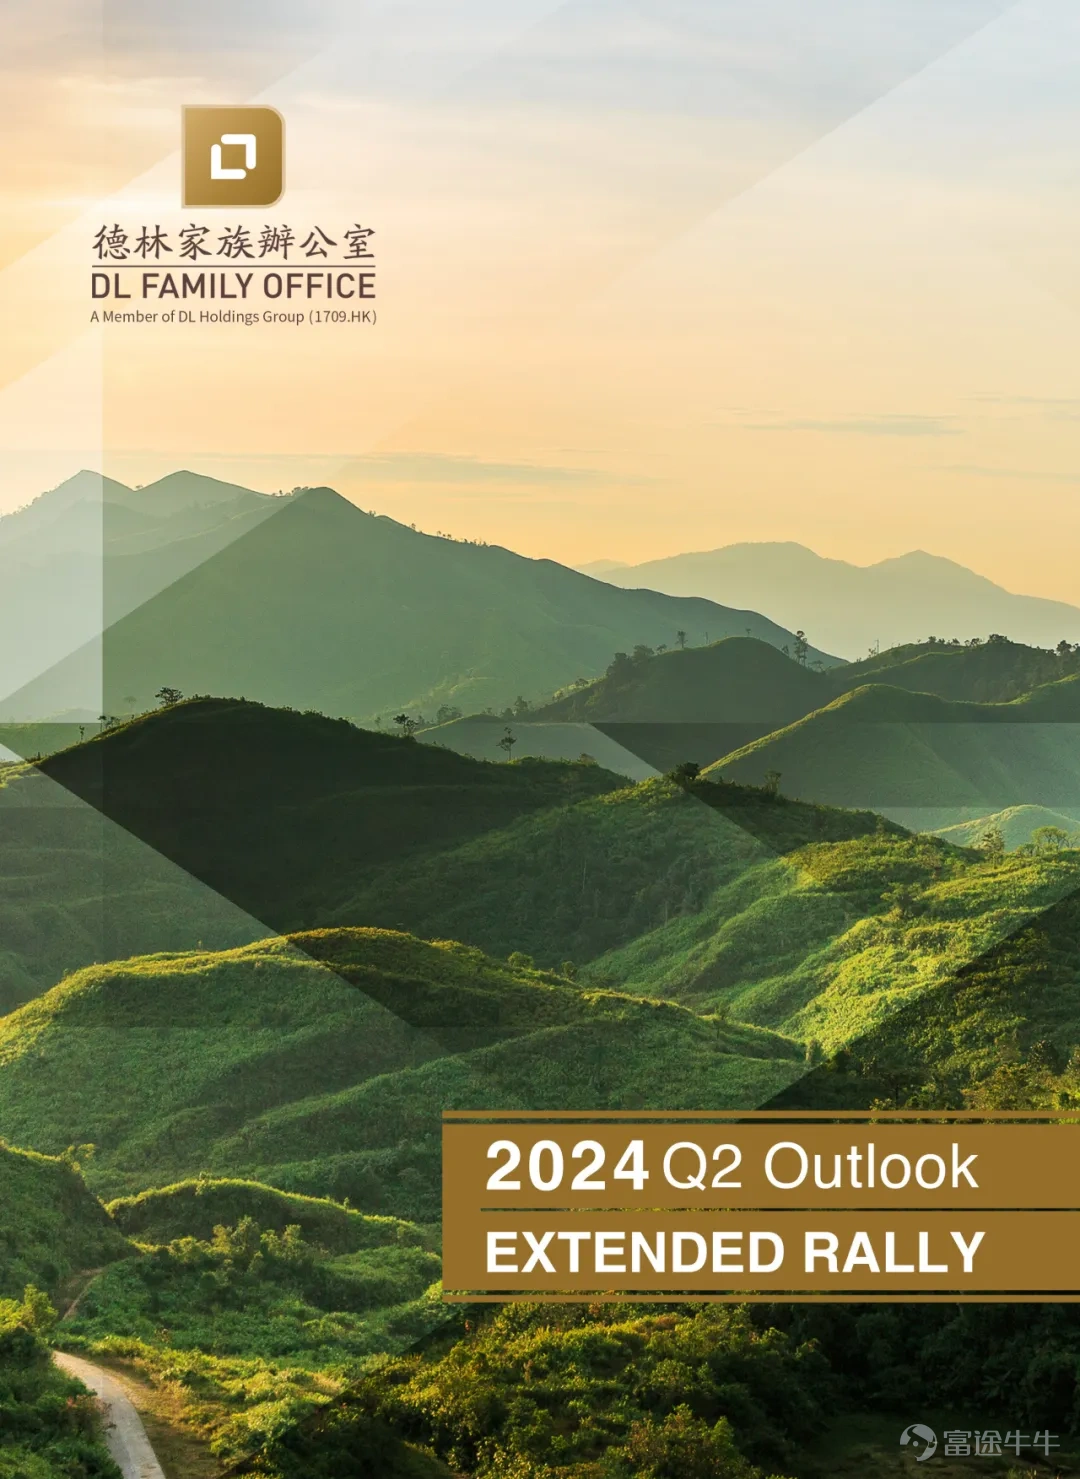 2024 Q2 Outlook: Extended Rally